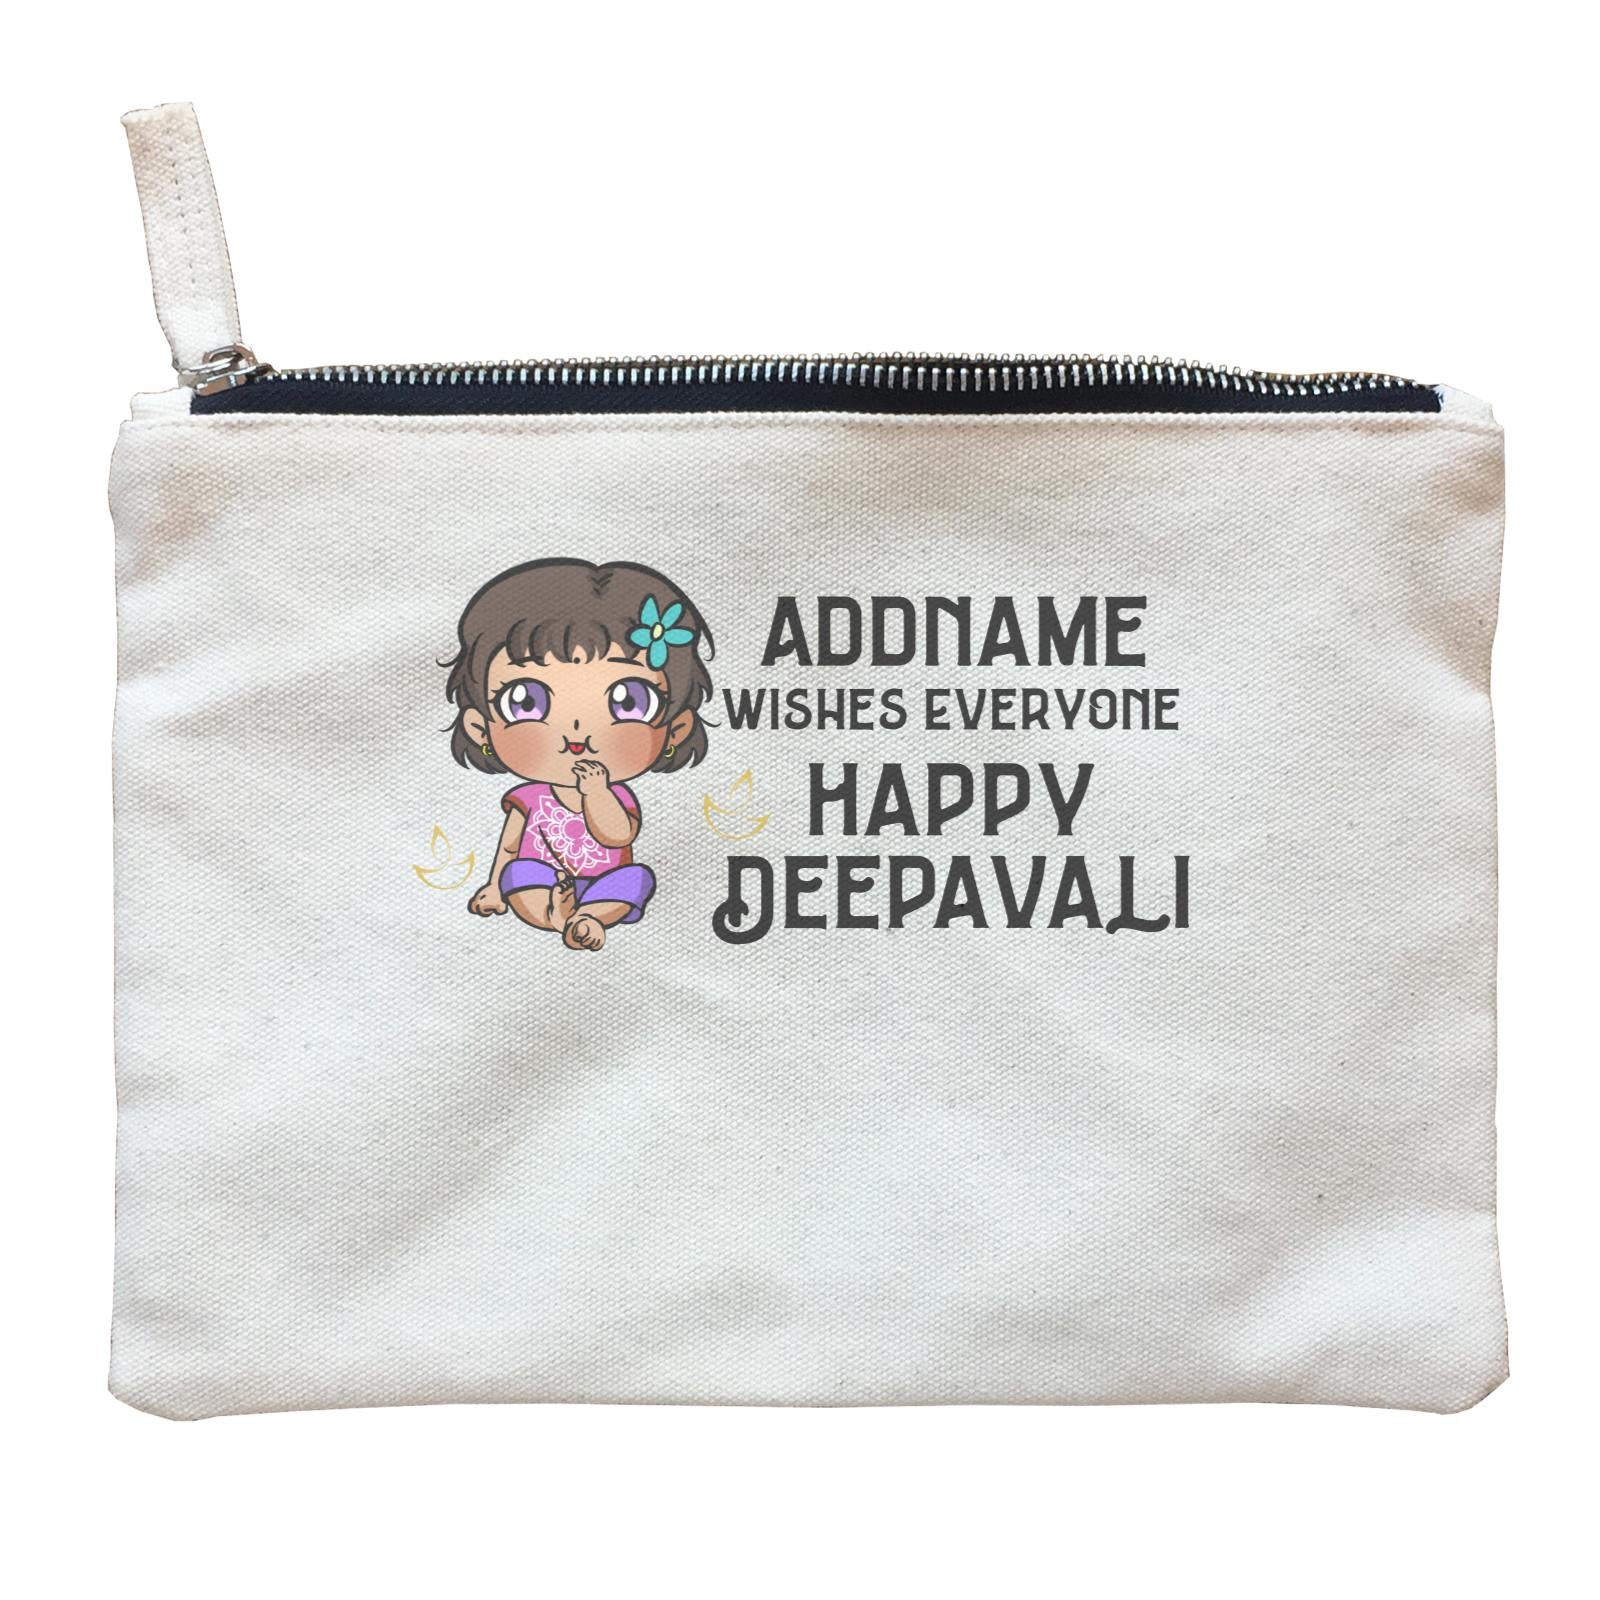 Deepavali Chibi Baby Girl Front Addname Wishes Everyone Deepavali Zipper Pouch